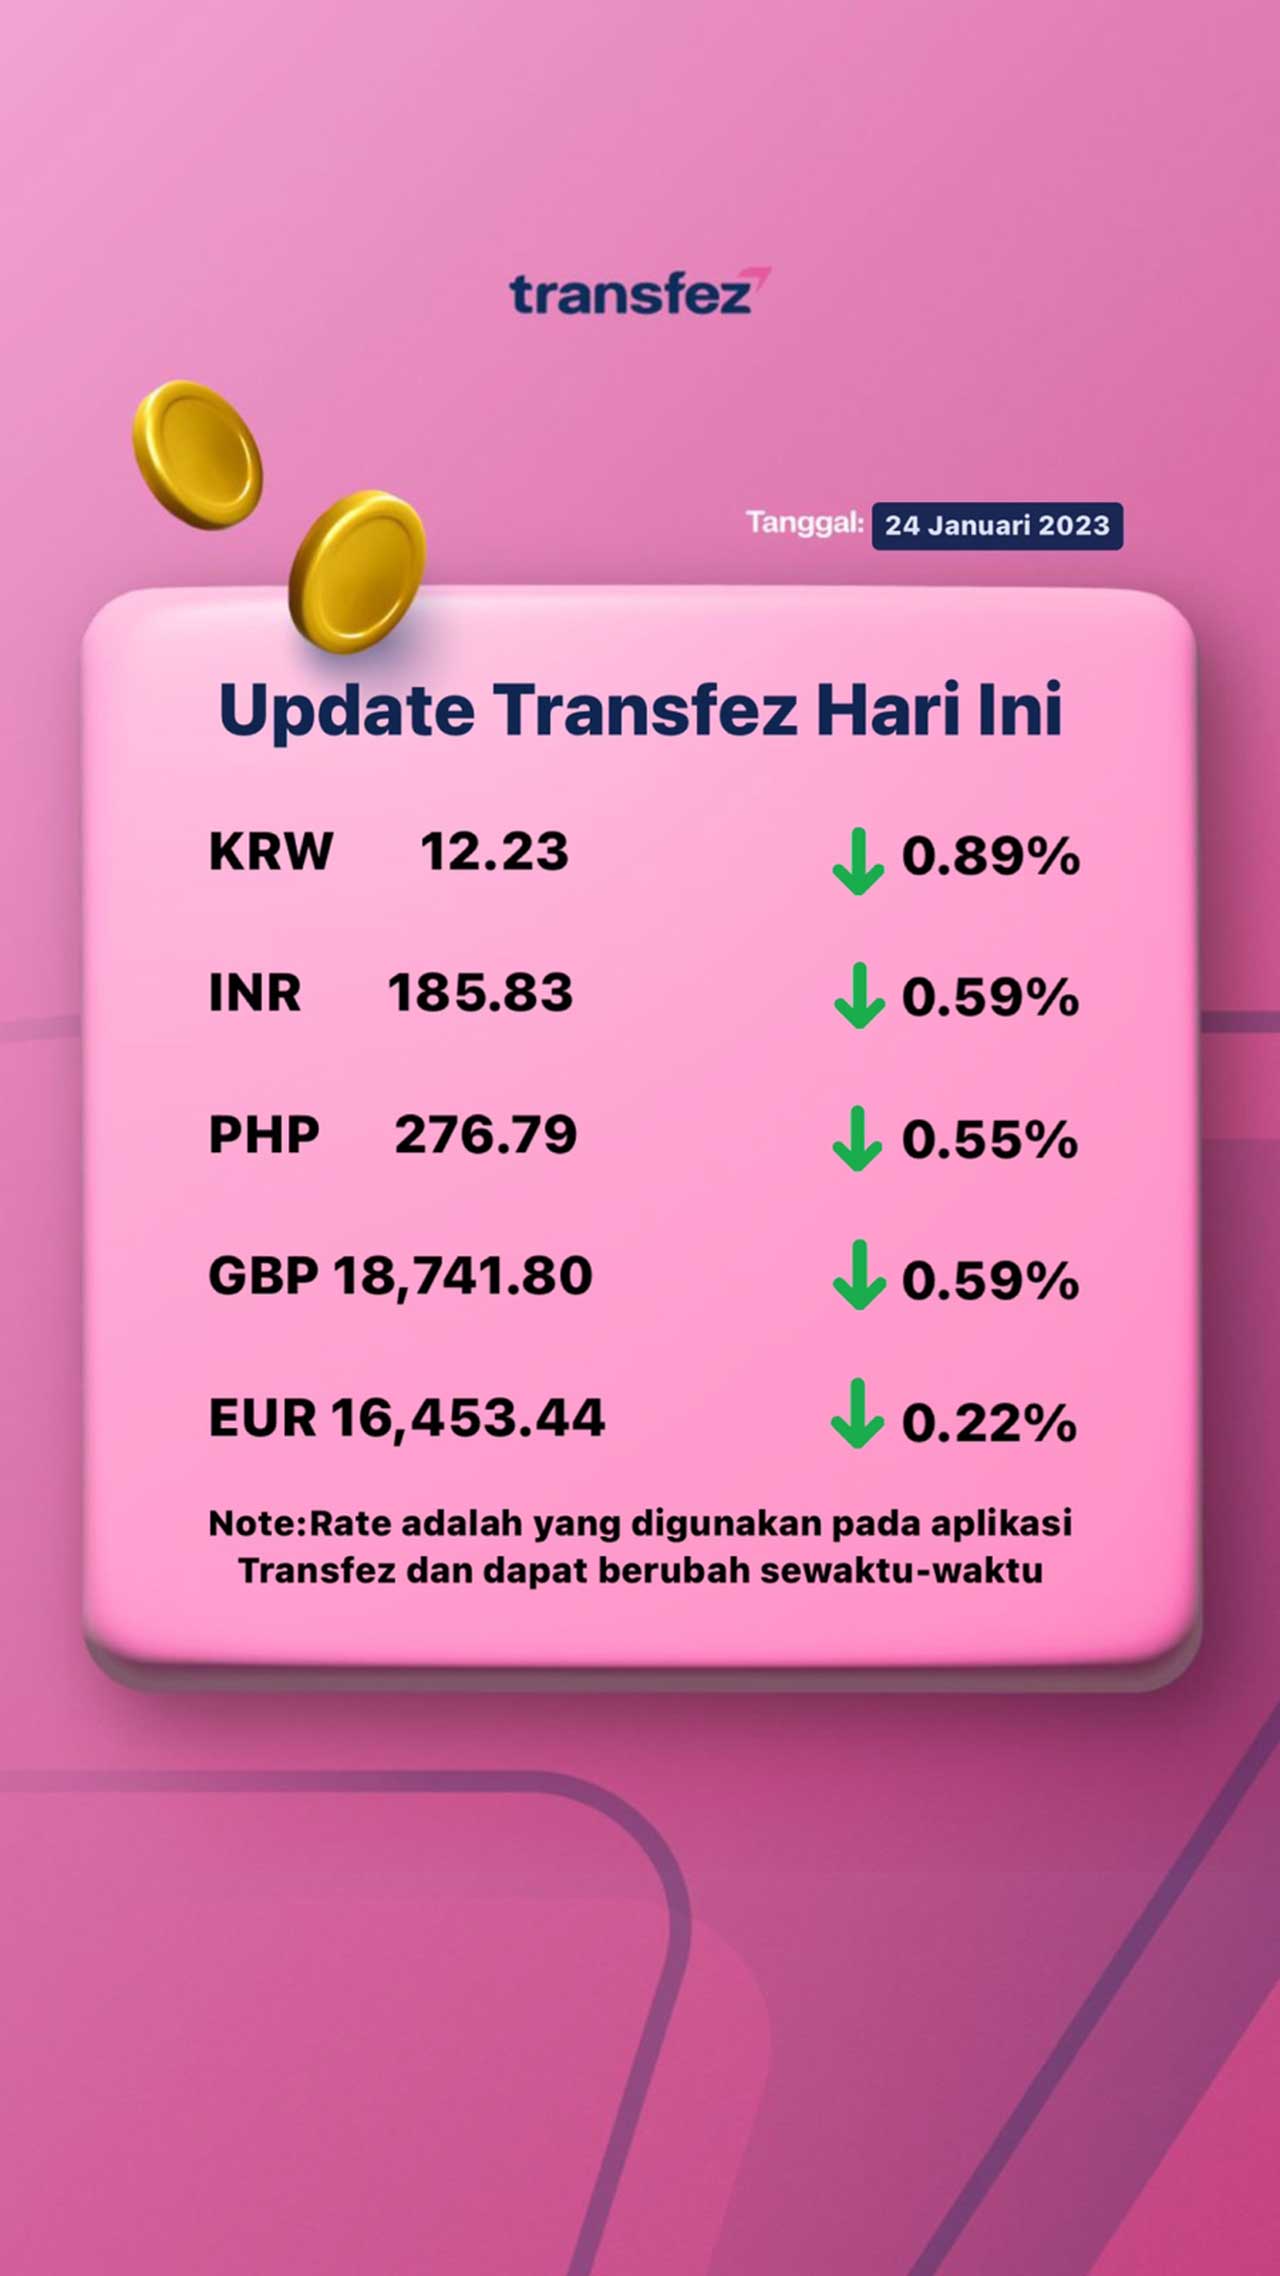 Today's Transfez Rate Update January 24 2023